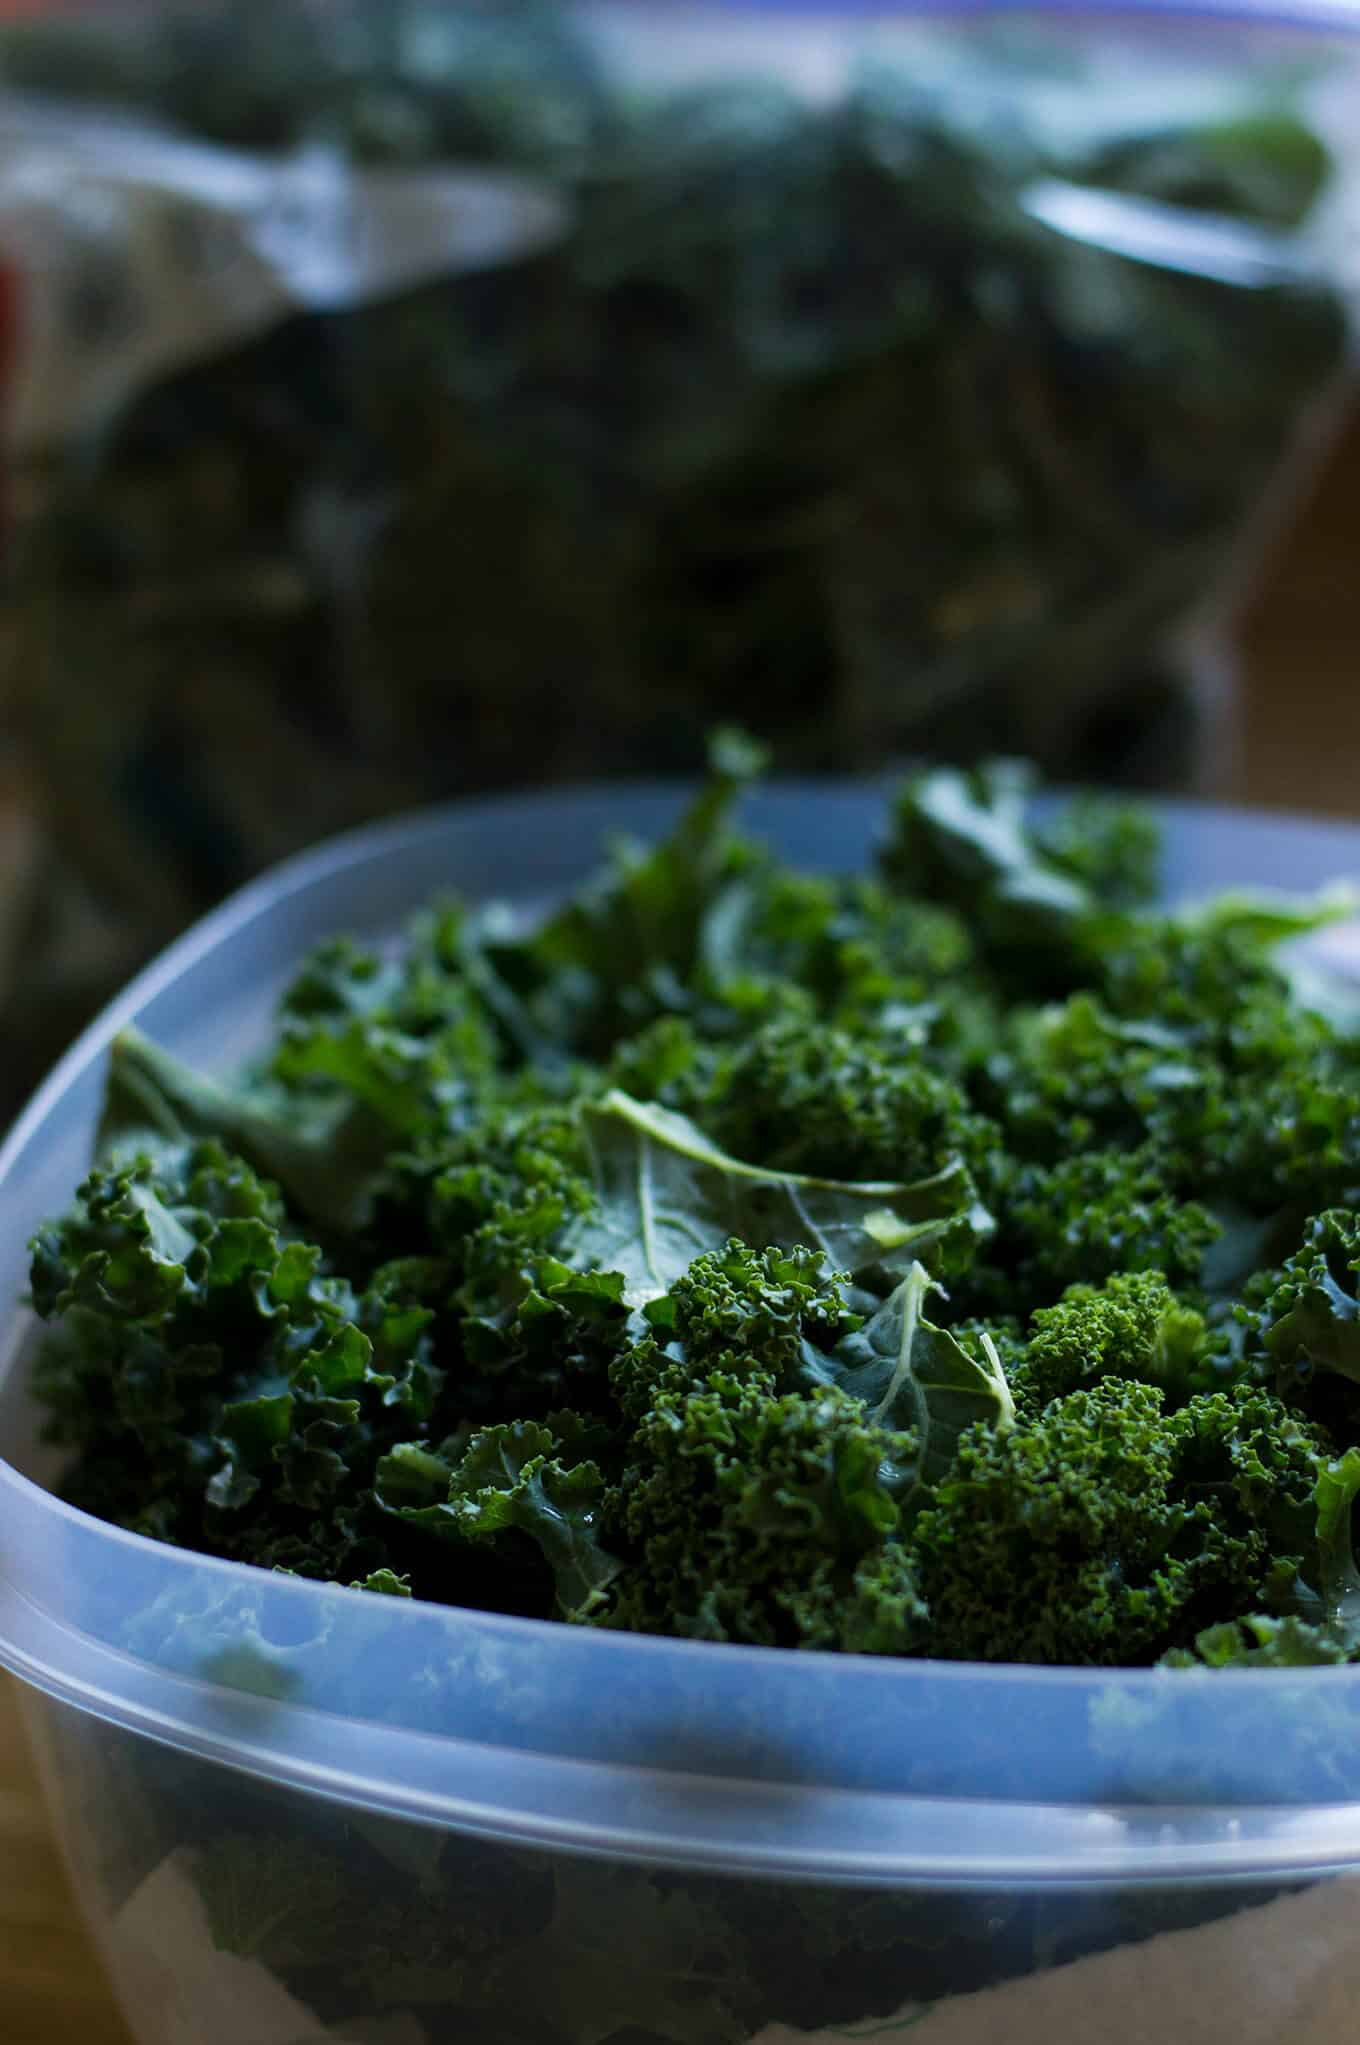 A close up of kale in a food storage container.